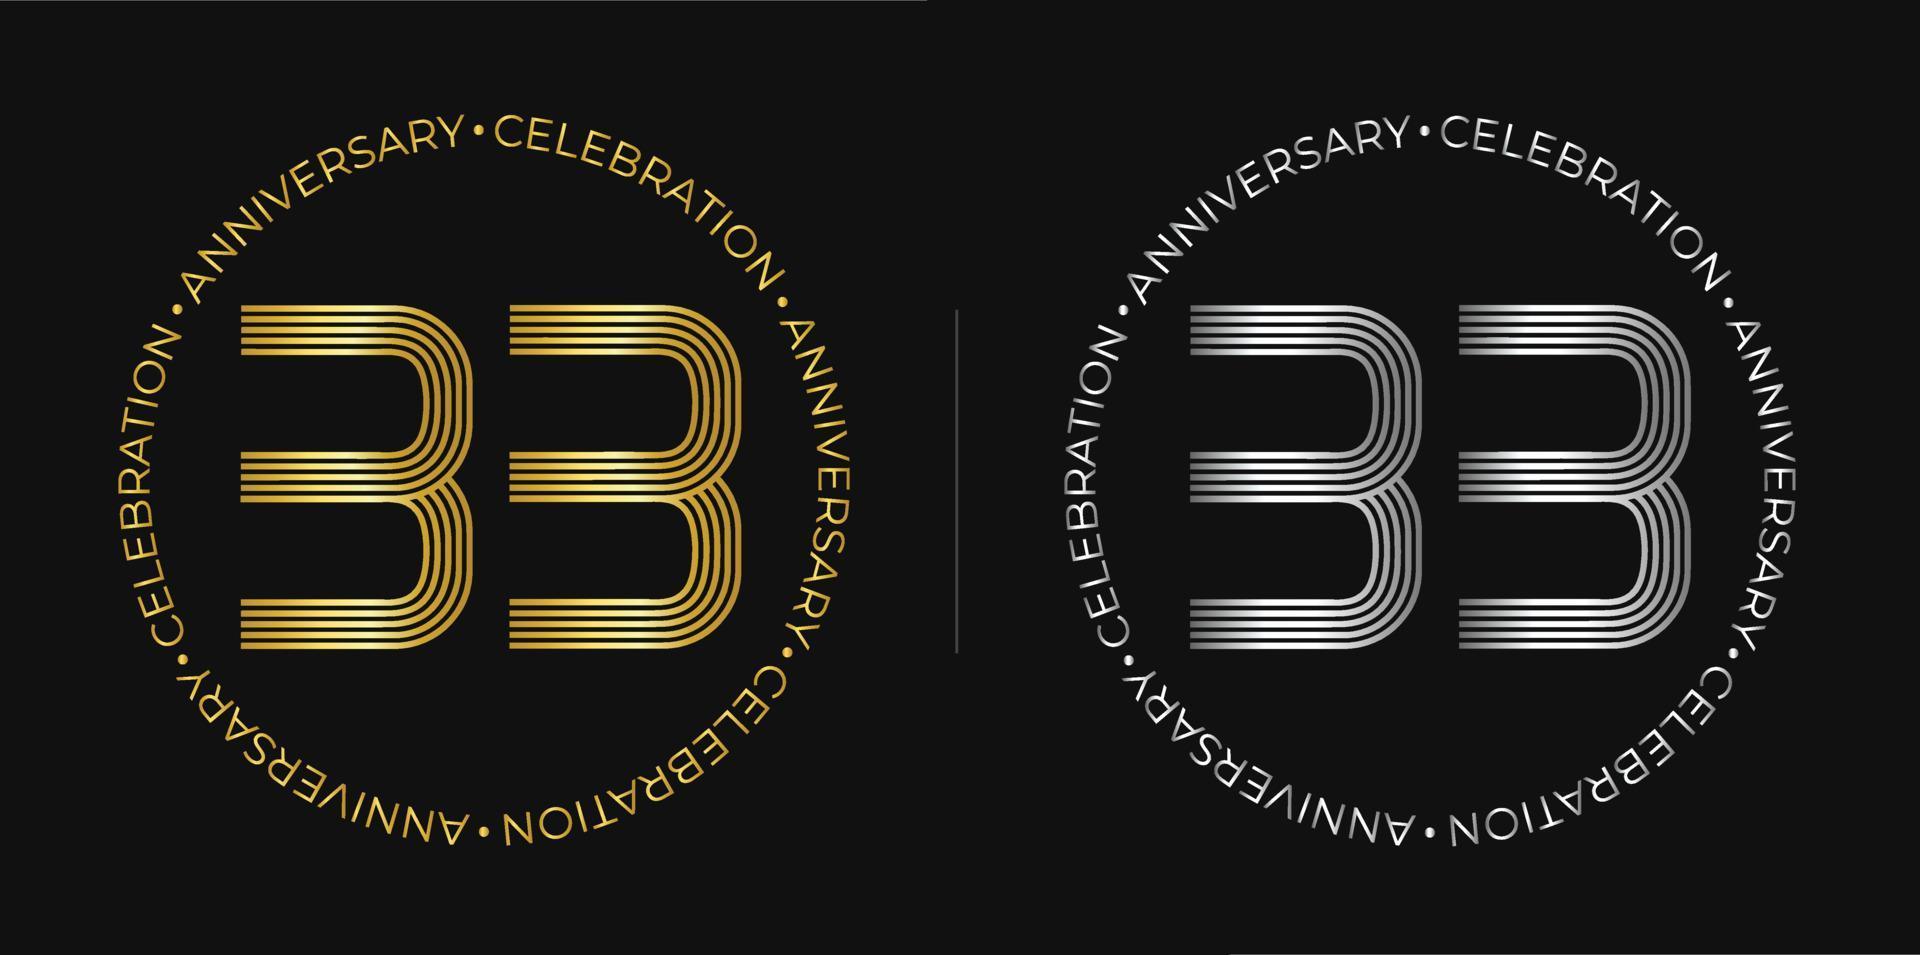 33th birthday. Thirty-three years anniversary celebration banner in golden and silver colors. Circular logo with original numbers design in elegant lines. vector